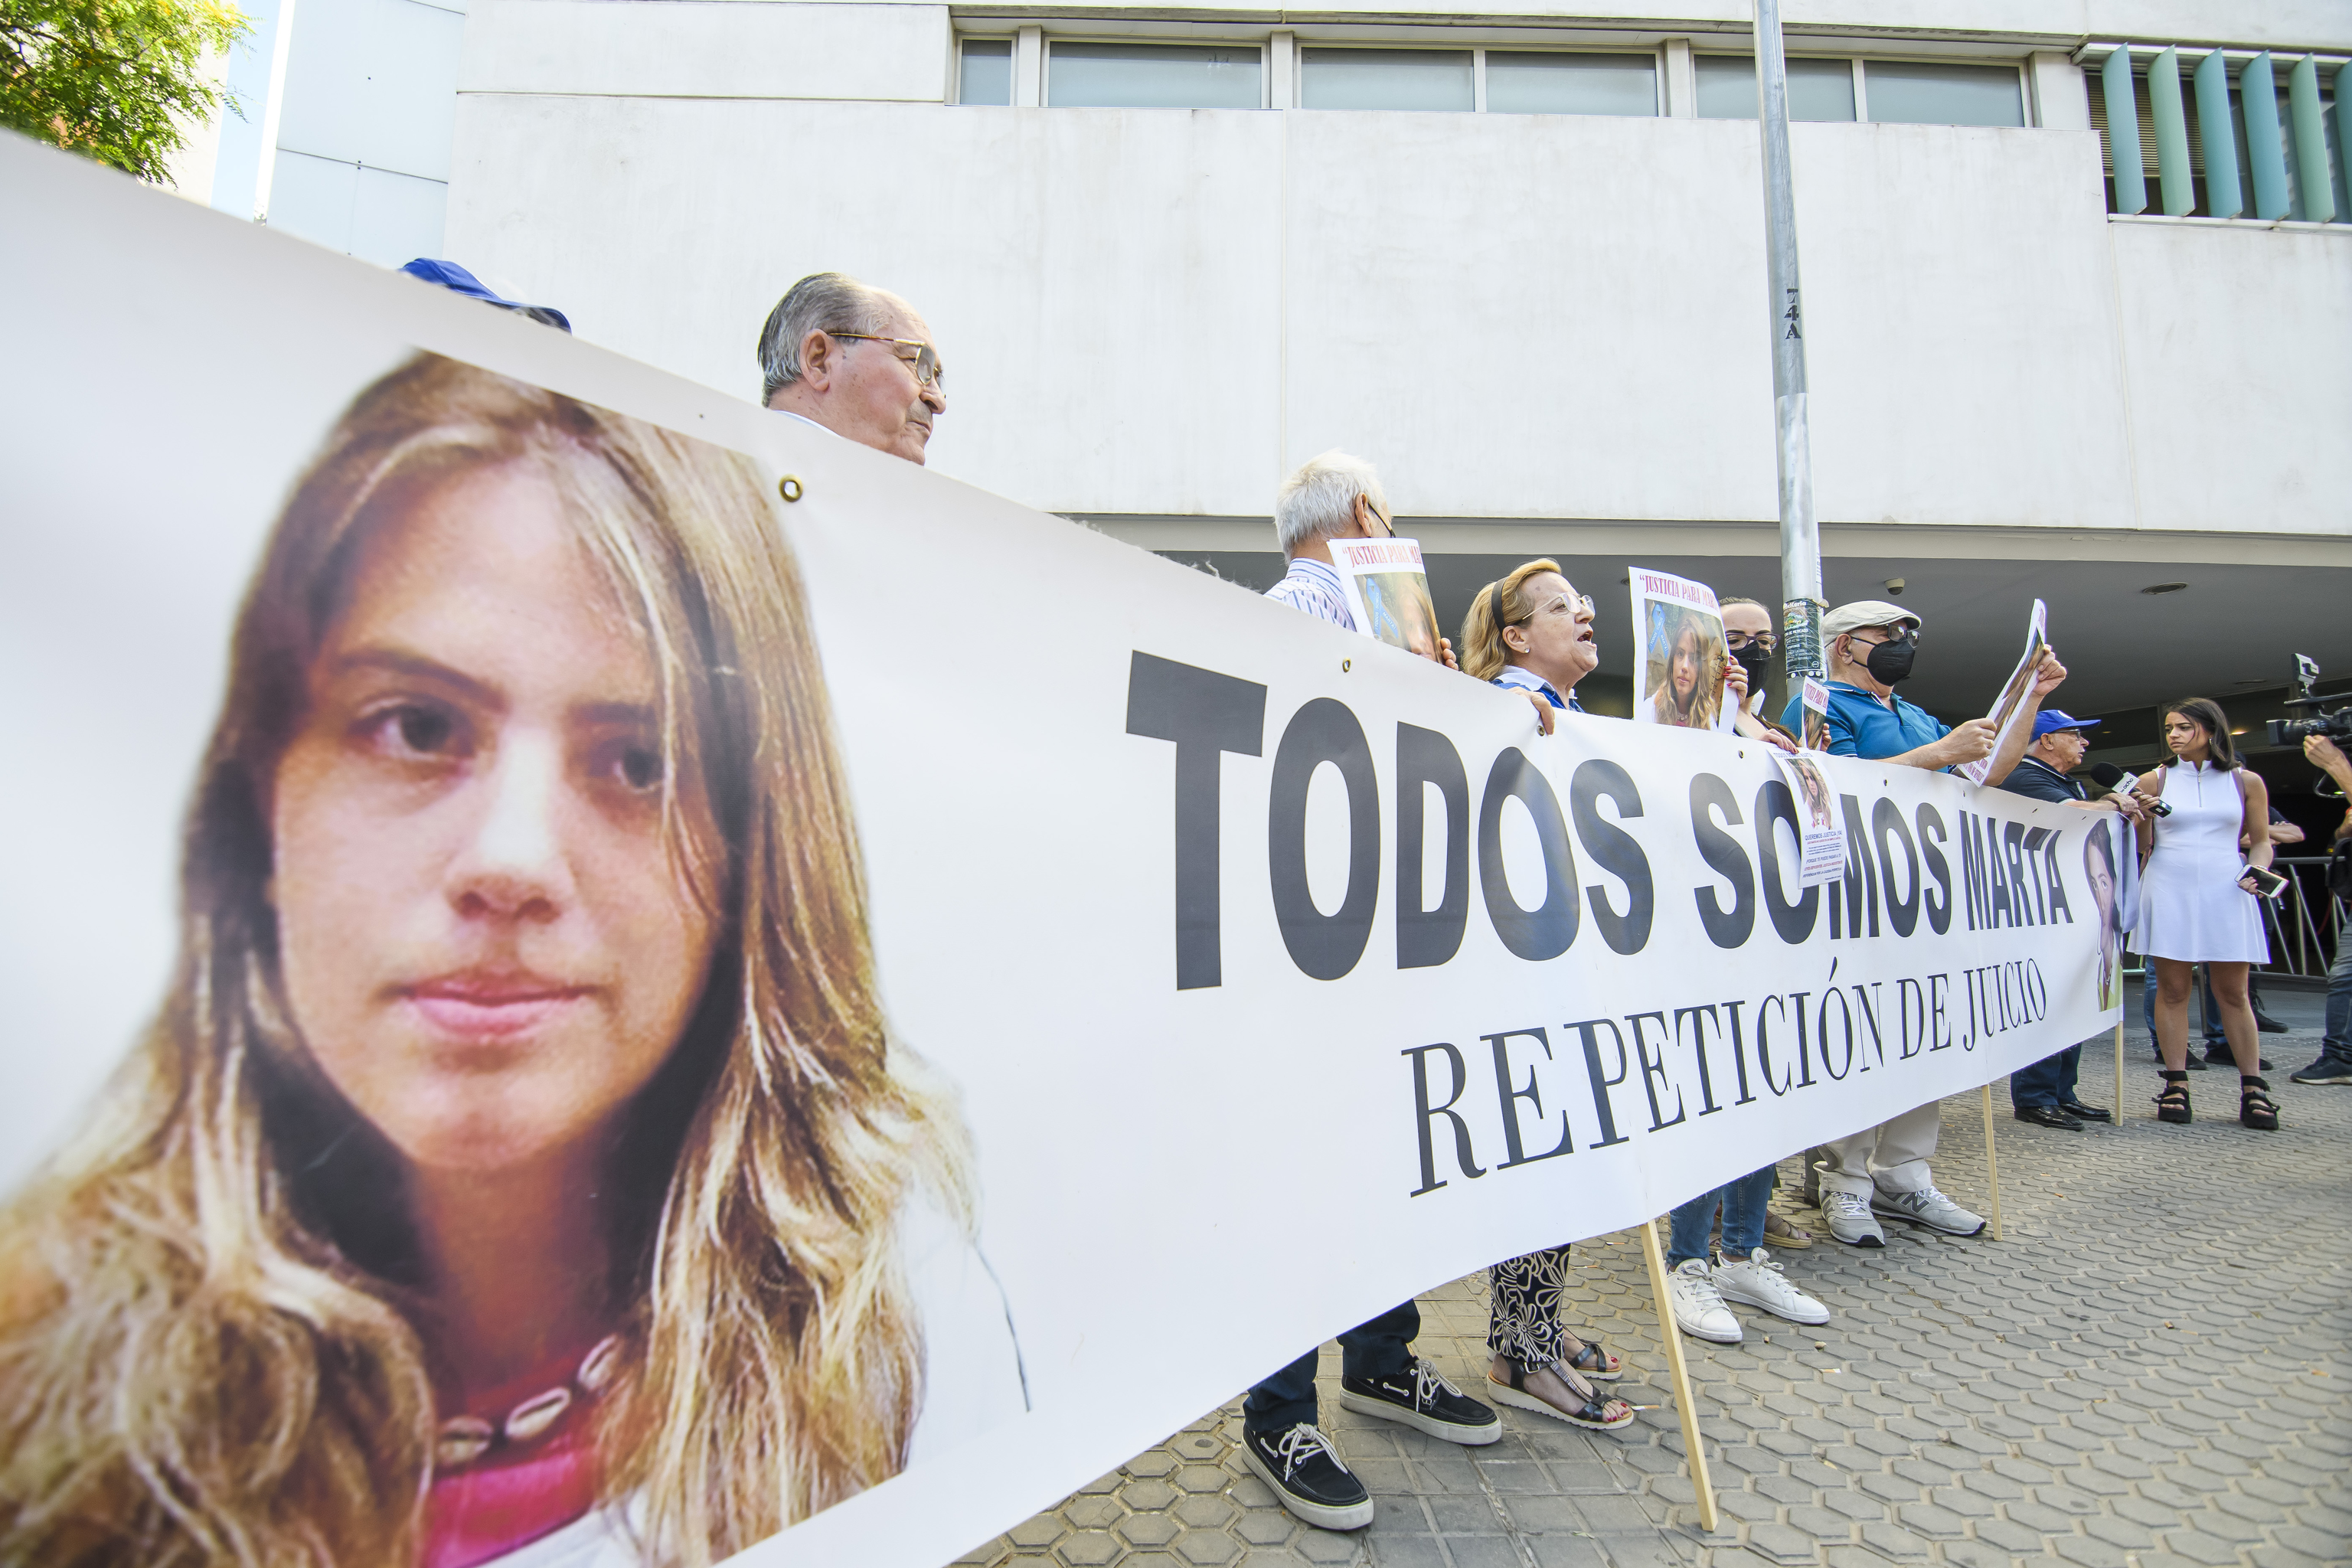 Relatives and neighbors of Marta del Castillo demand a new trial at the doors of the Seville courts.